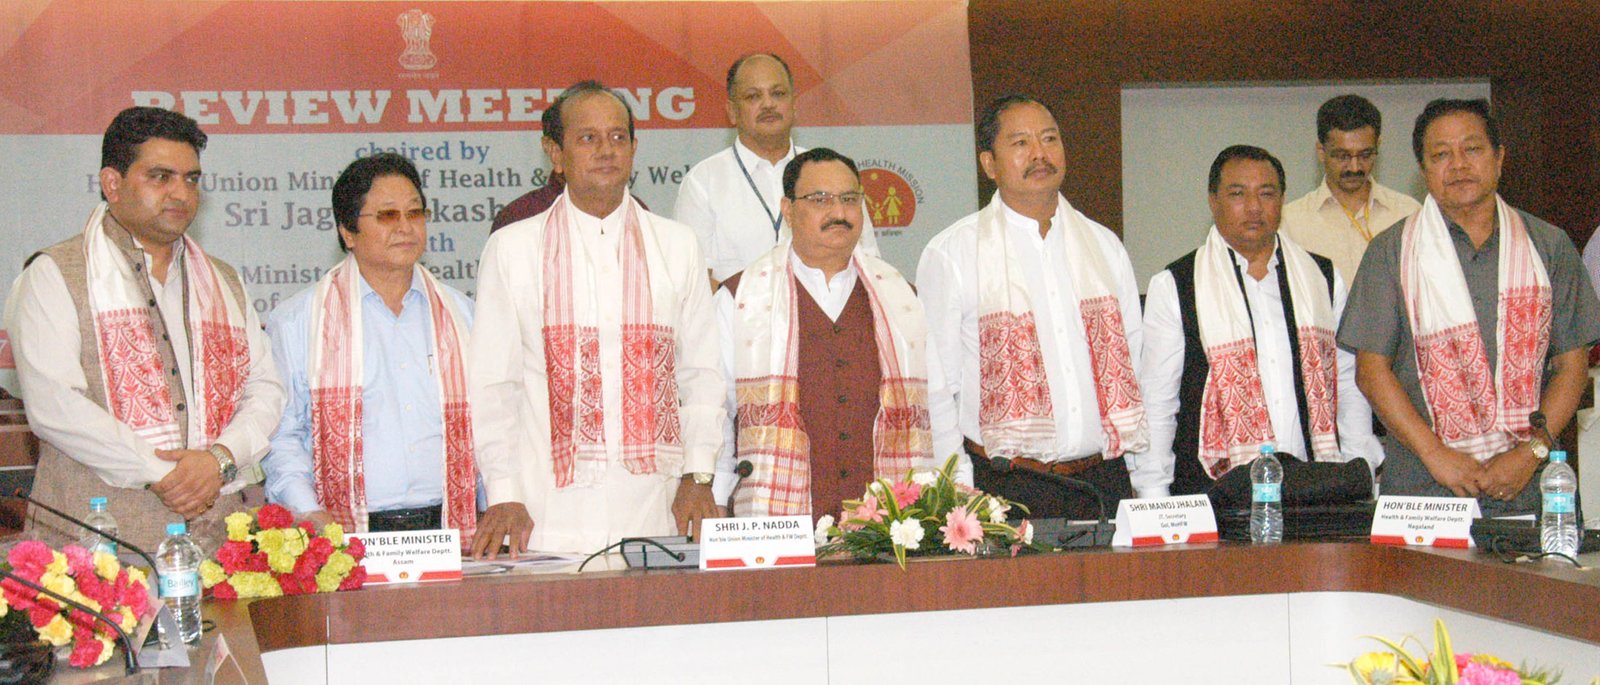 The Union Minister for Health and Family Welfare, Mr JP Nadda chairing a review meeting with the health ministers of North Eastern States, in Assam, Guwahati on June 27, 2015.